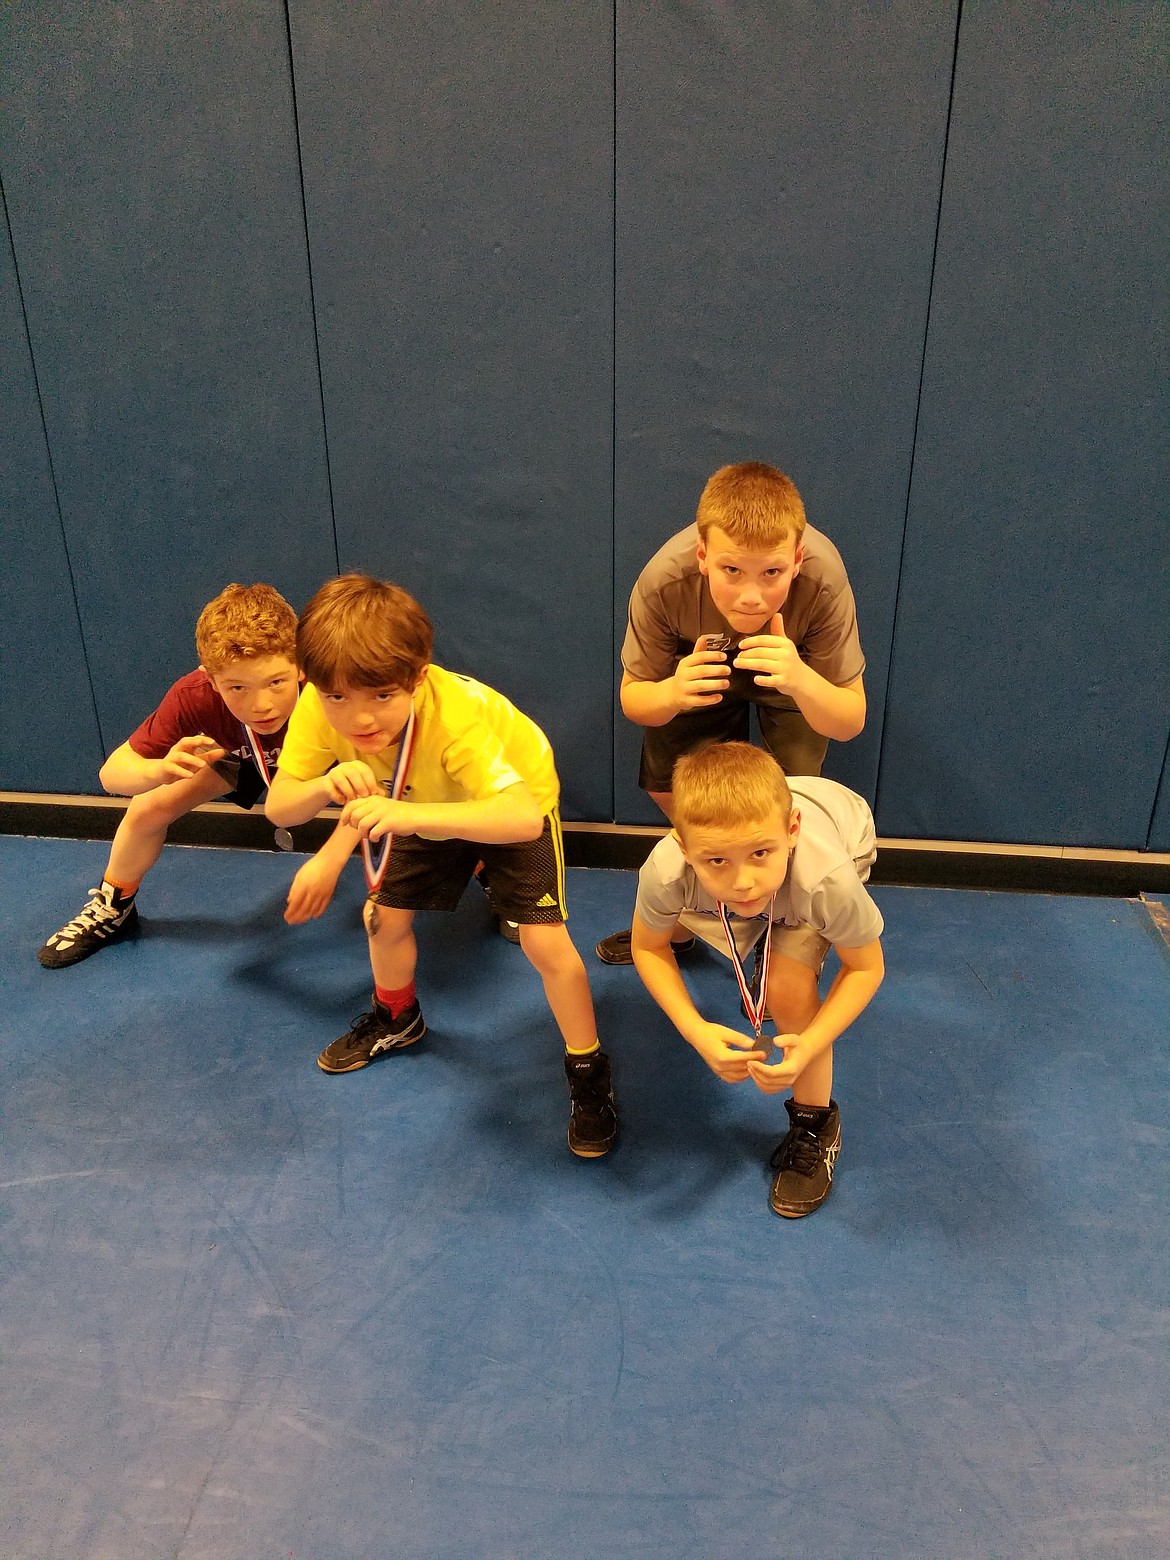 Courtesy photo
Buzzsaw Wrestling Club results from the Big Cat Tournament Feb. 24 in Mead, Wash. From left are Brock Armstrong, 2nd place; Cole Armstrong, 2nd place; Gabe Wullenwaber, 1st place; and Seth Fredrickson, 2nd place.